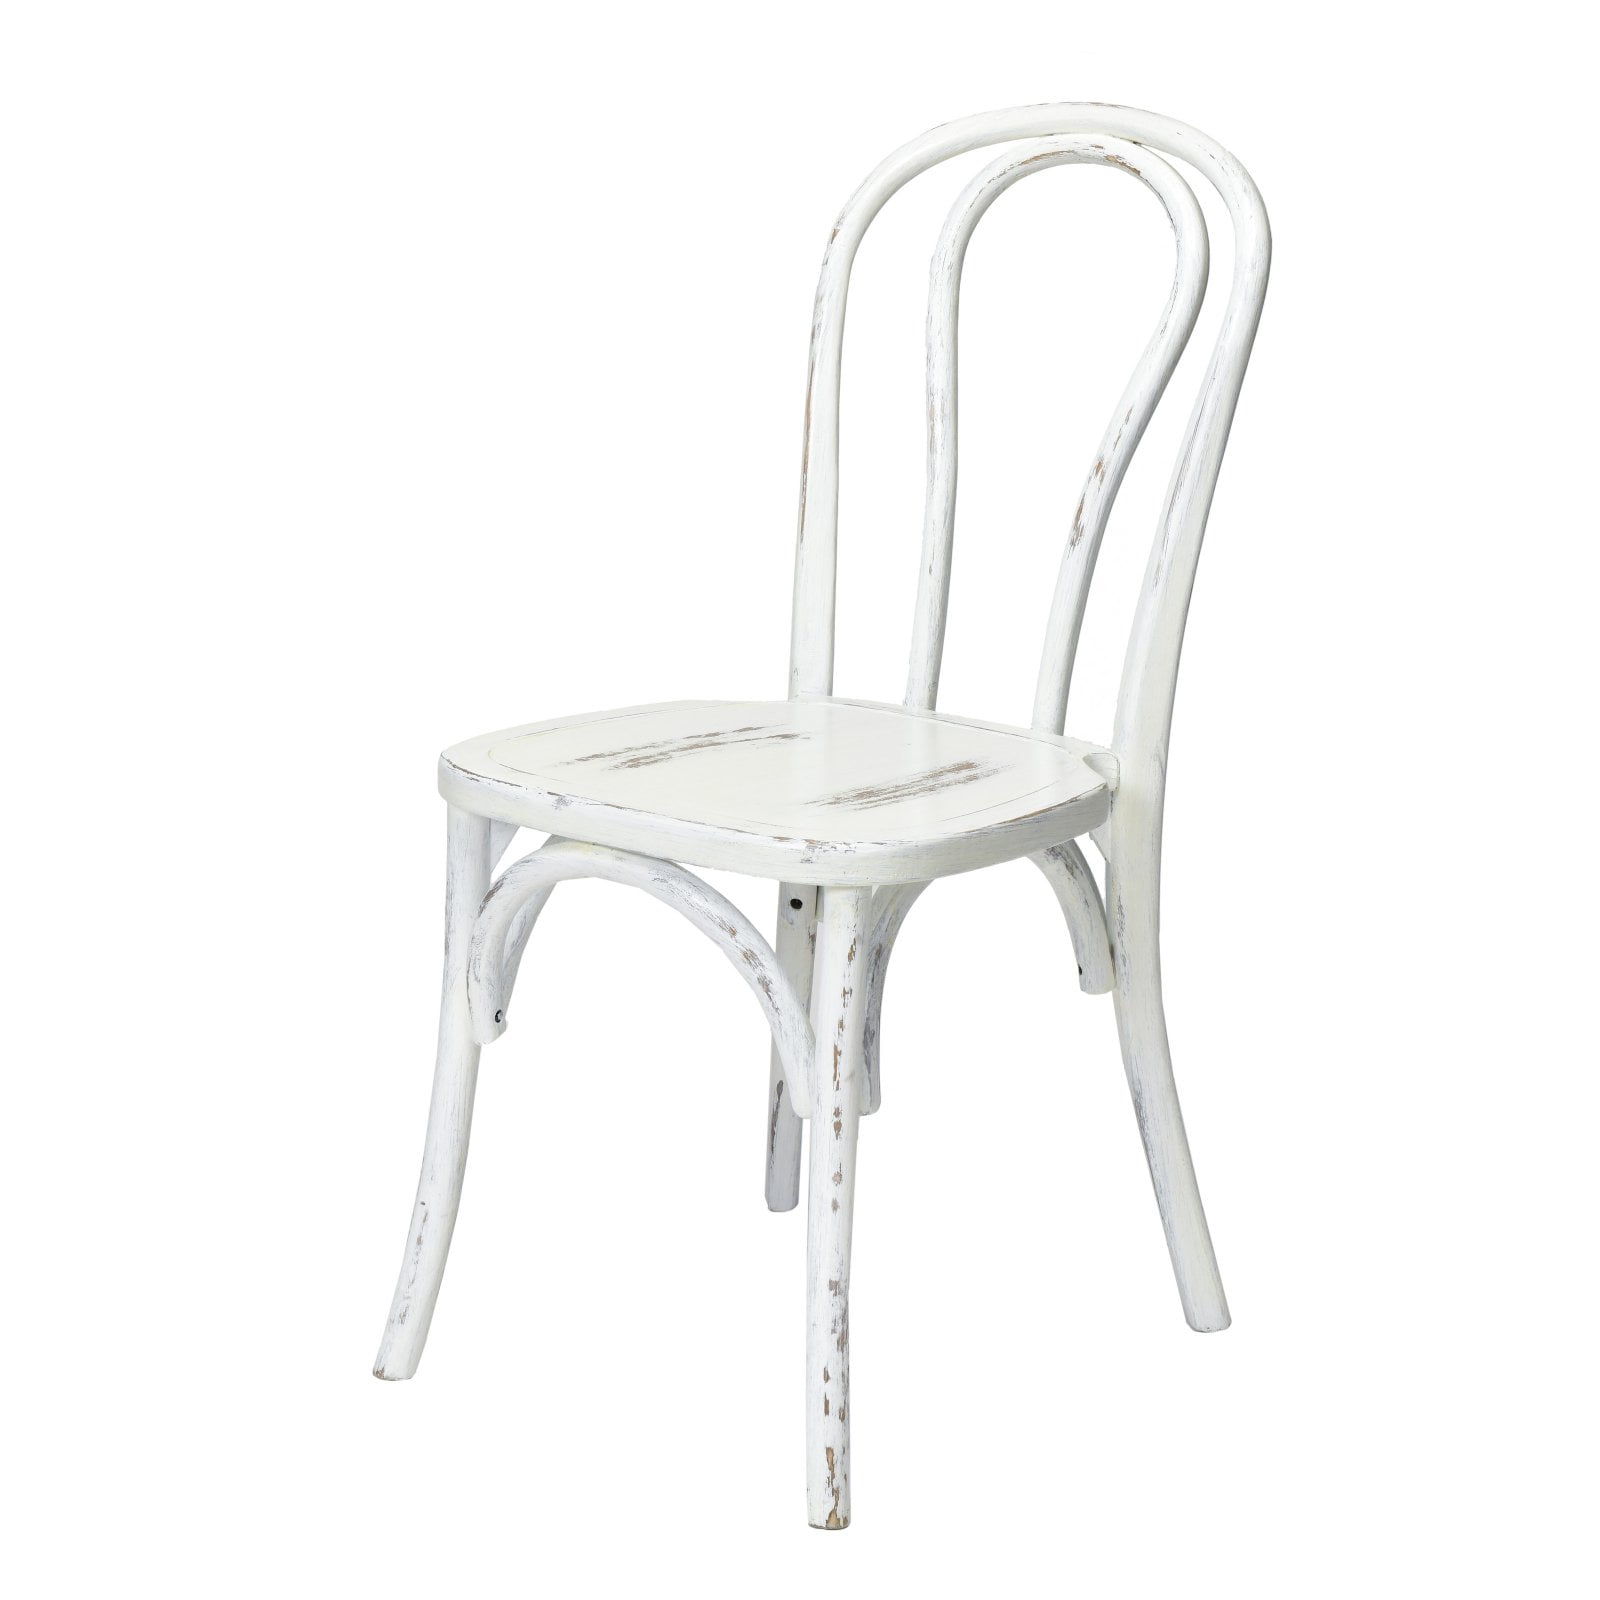 W-611-x02-bentw-ww American Classic Sonoma Bentwood Stackable Chair - White Wash - 35 In.